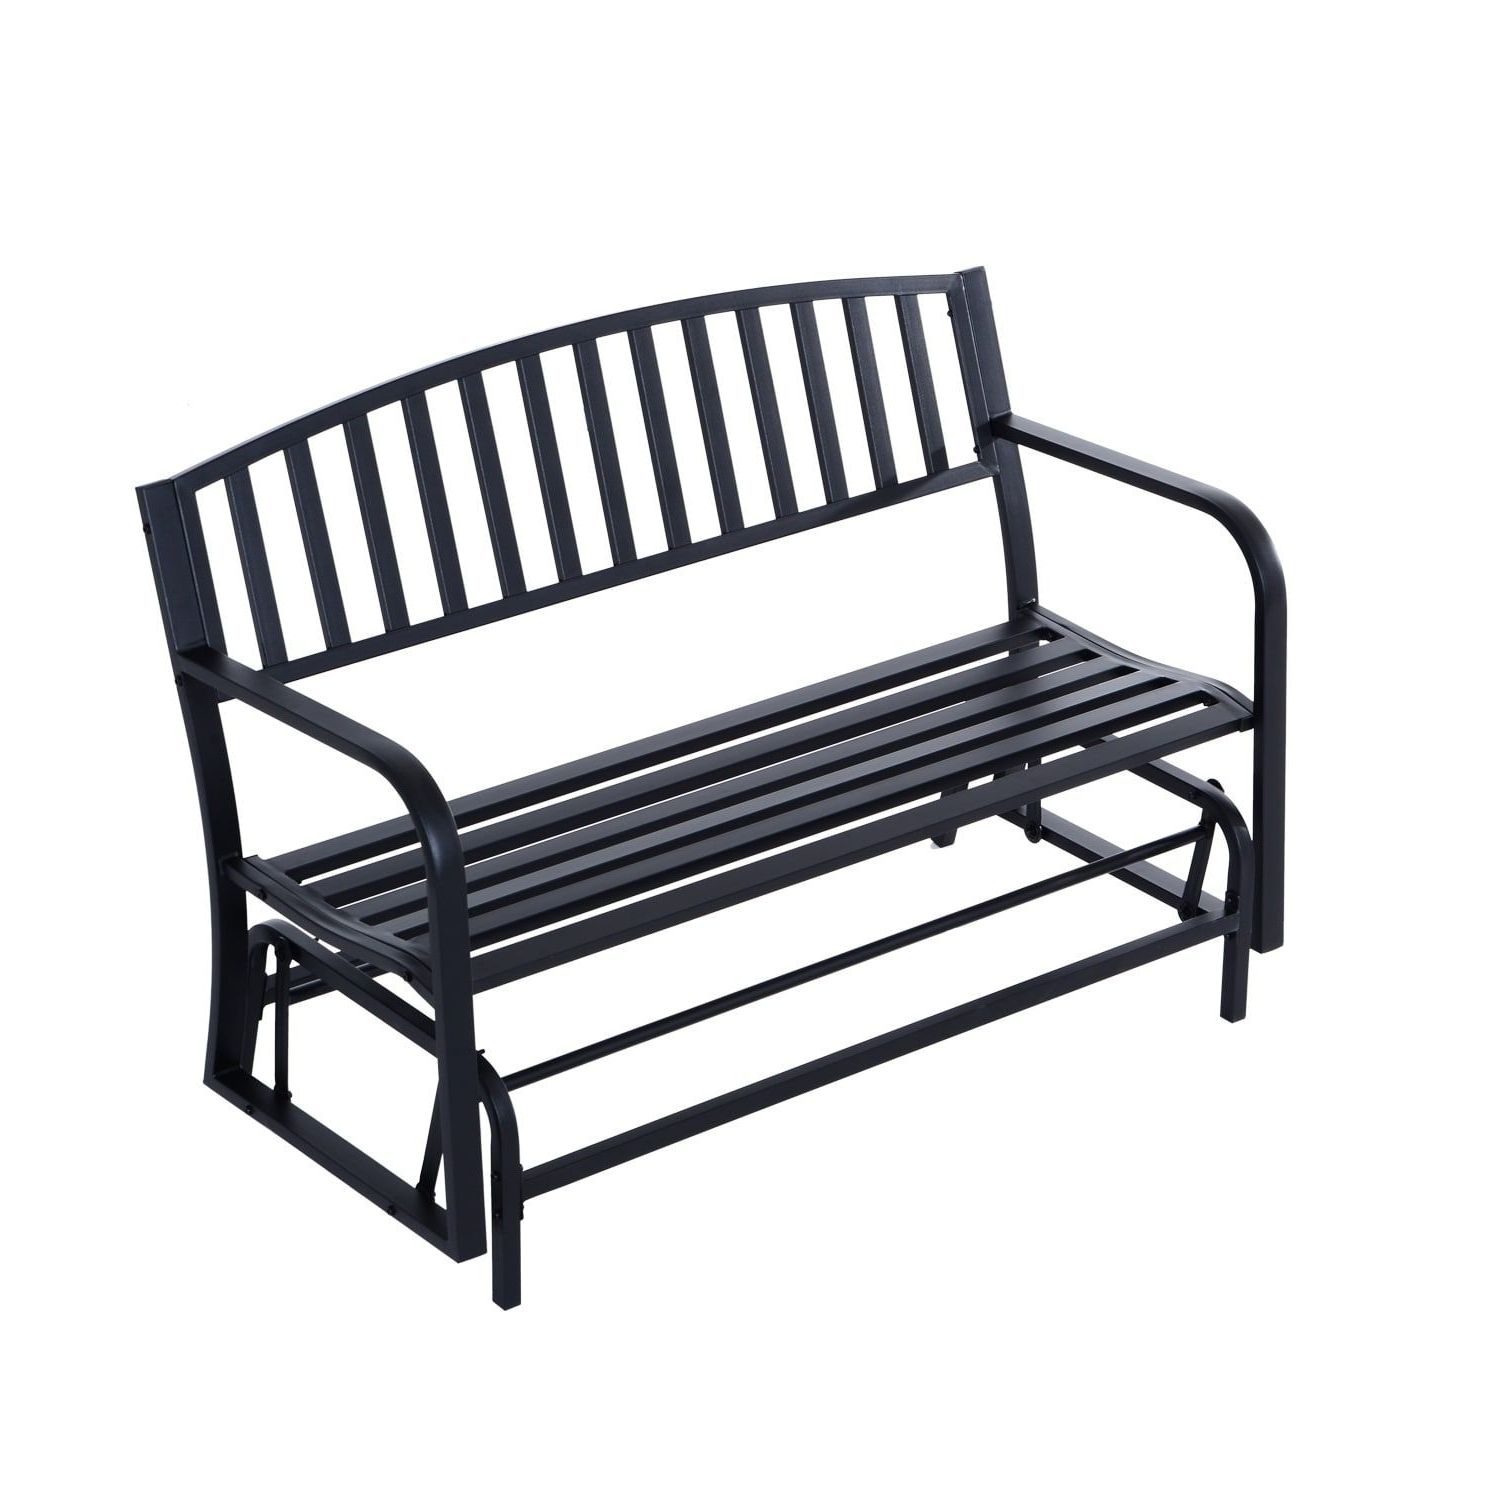 Outdoor Steel Patio Swing Glider Benches In 2019 Outsunny 50 Inch Outdoor Steel Patio Swing Glider Bench (View 1 of 25)